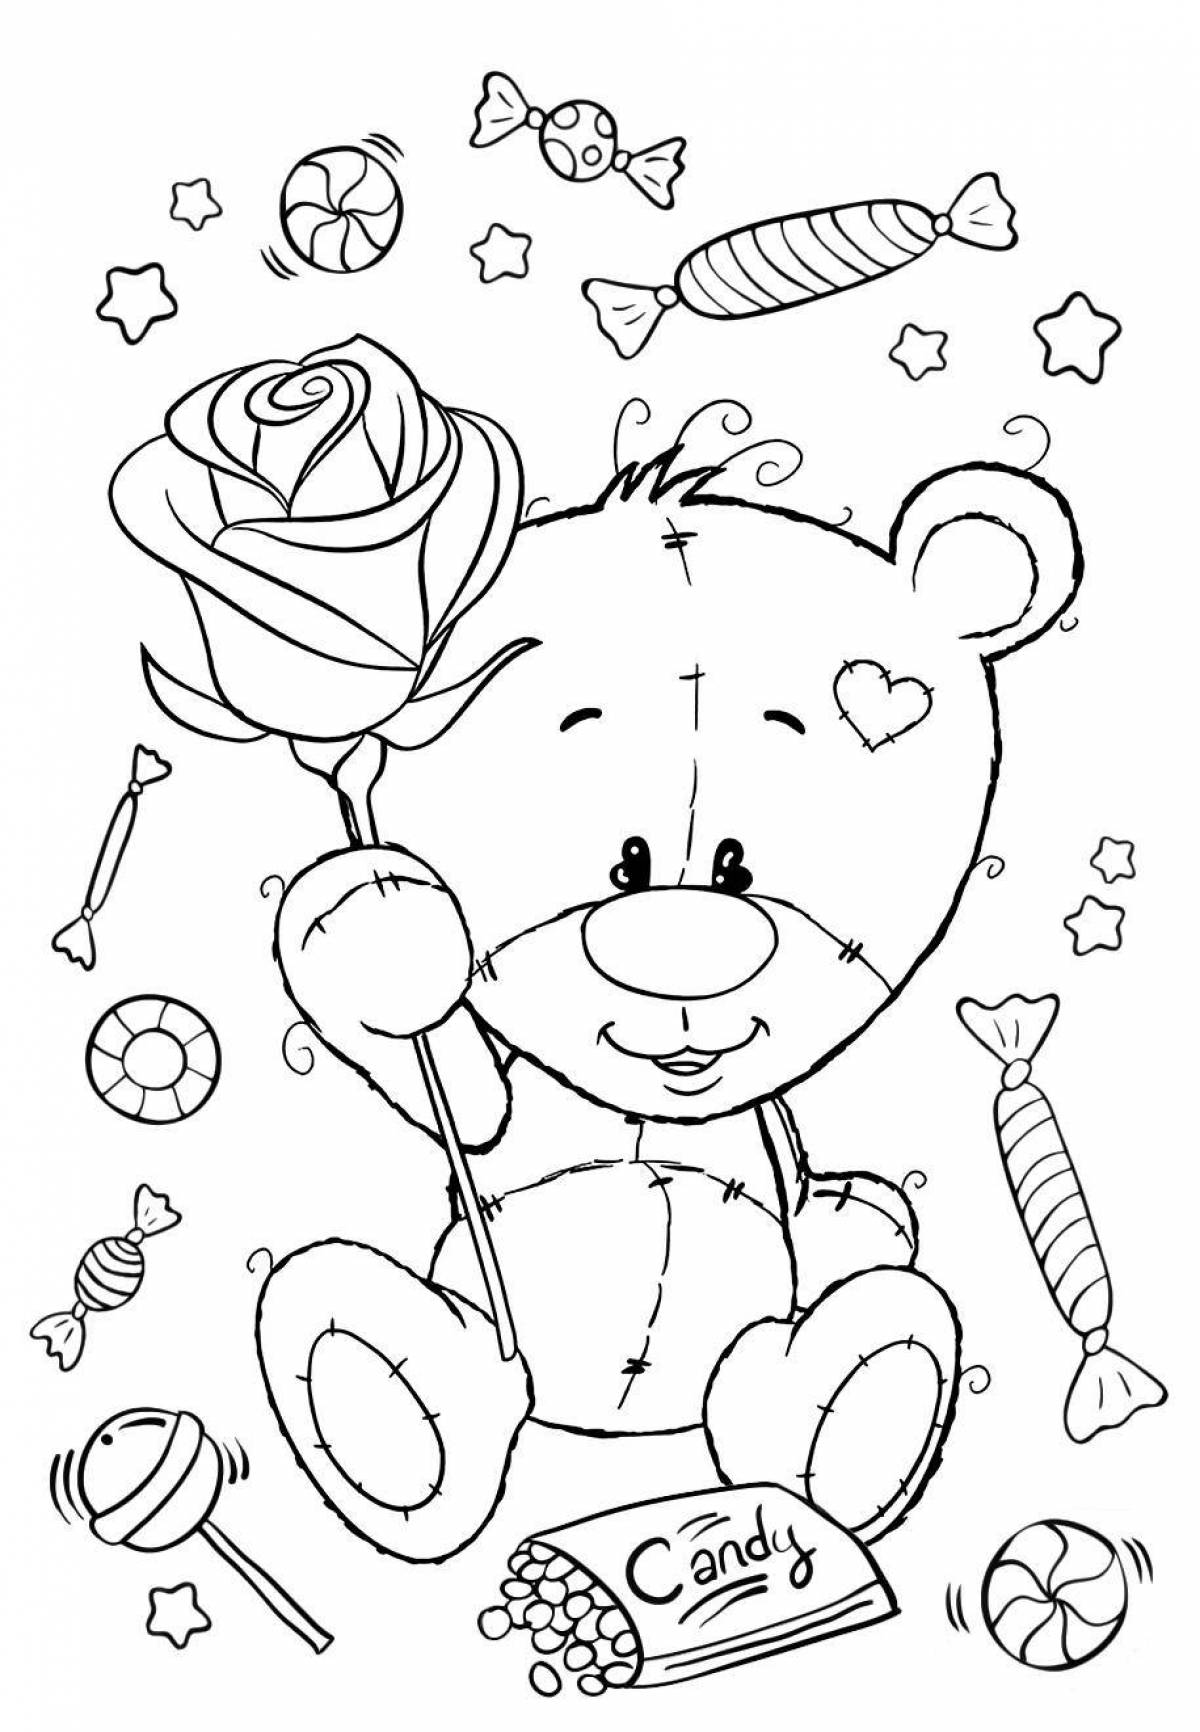 Sweet bear coloring book for girls